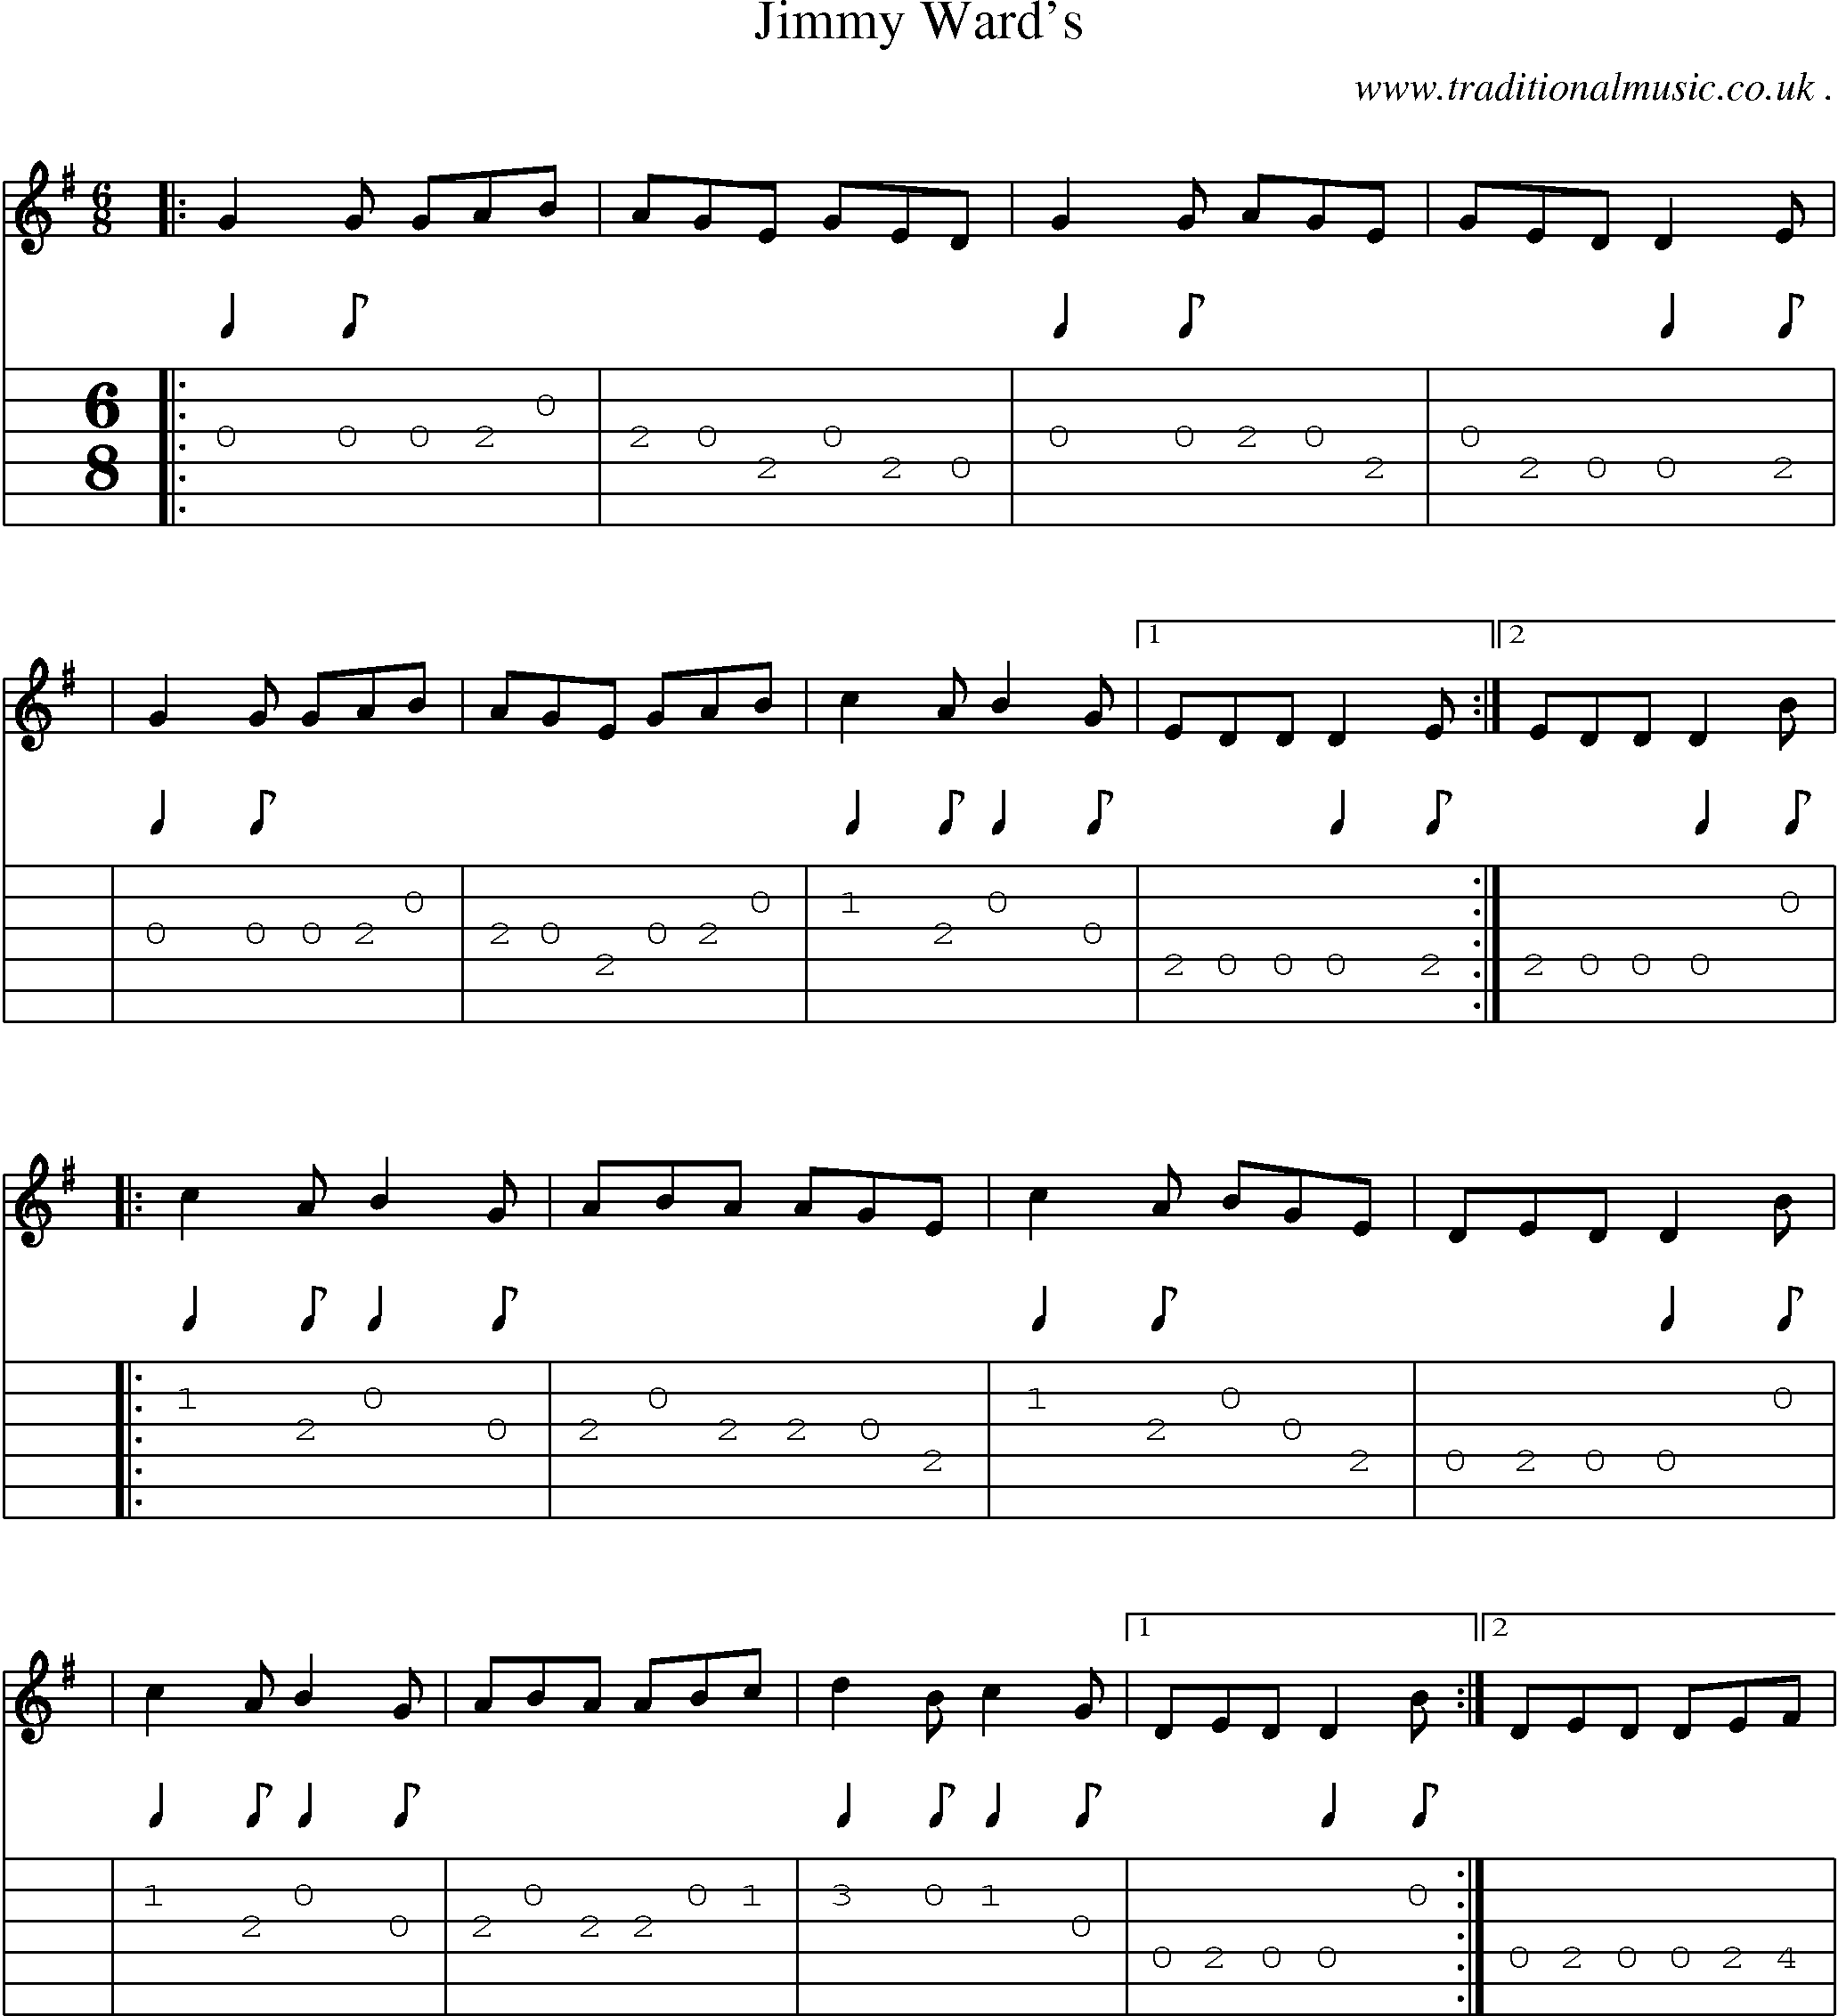 Sheet-Music and Guitar Tabs for Jimmy Wards